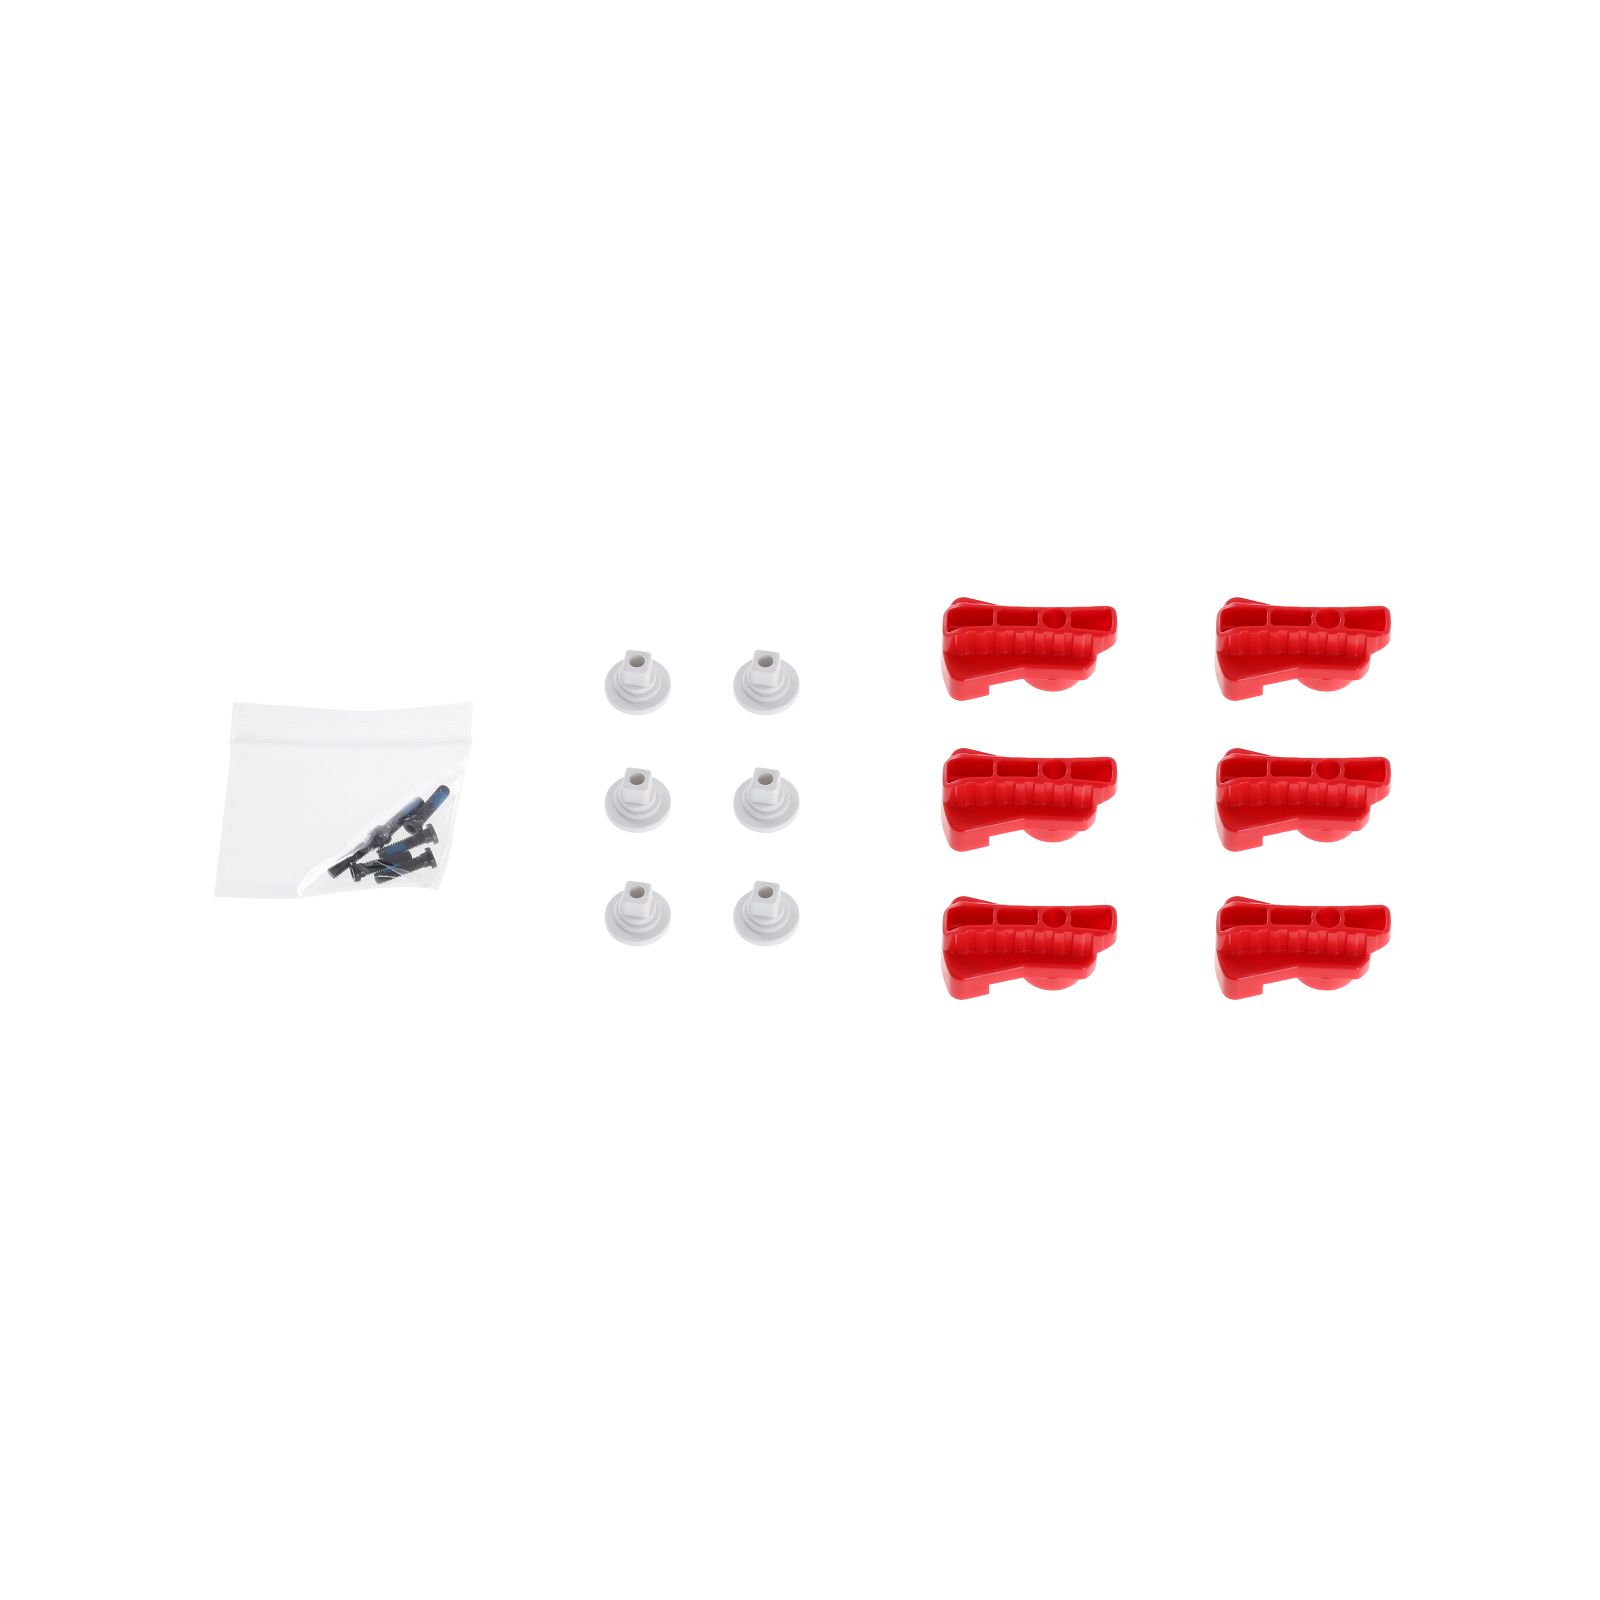 DJI Matrice 600 Spare Part 22 Red Rotatable Clamp Kit